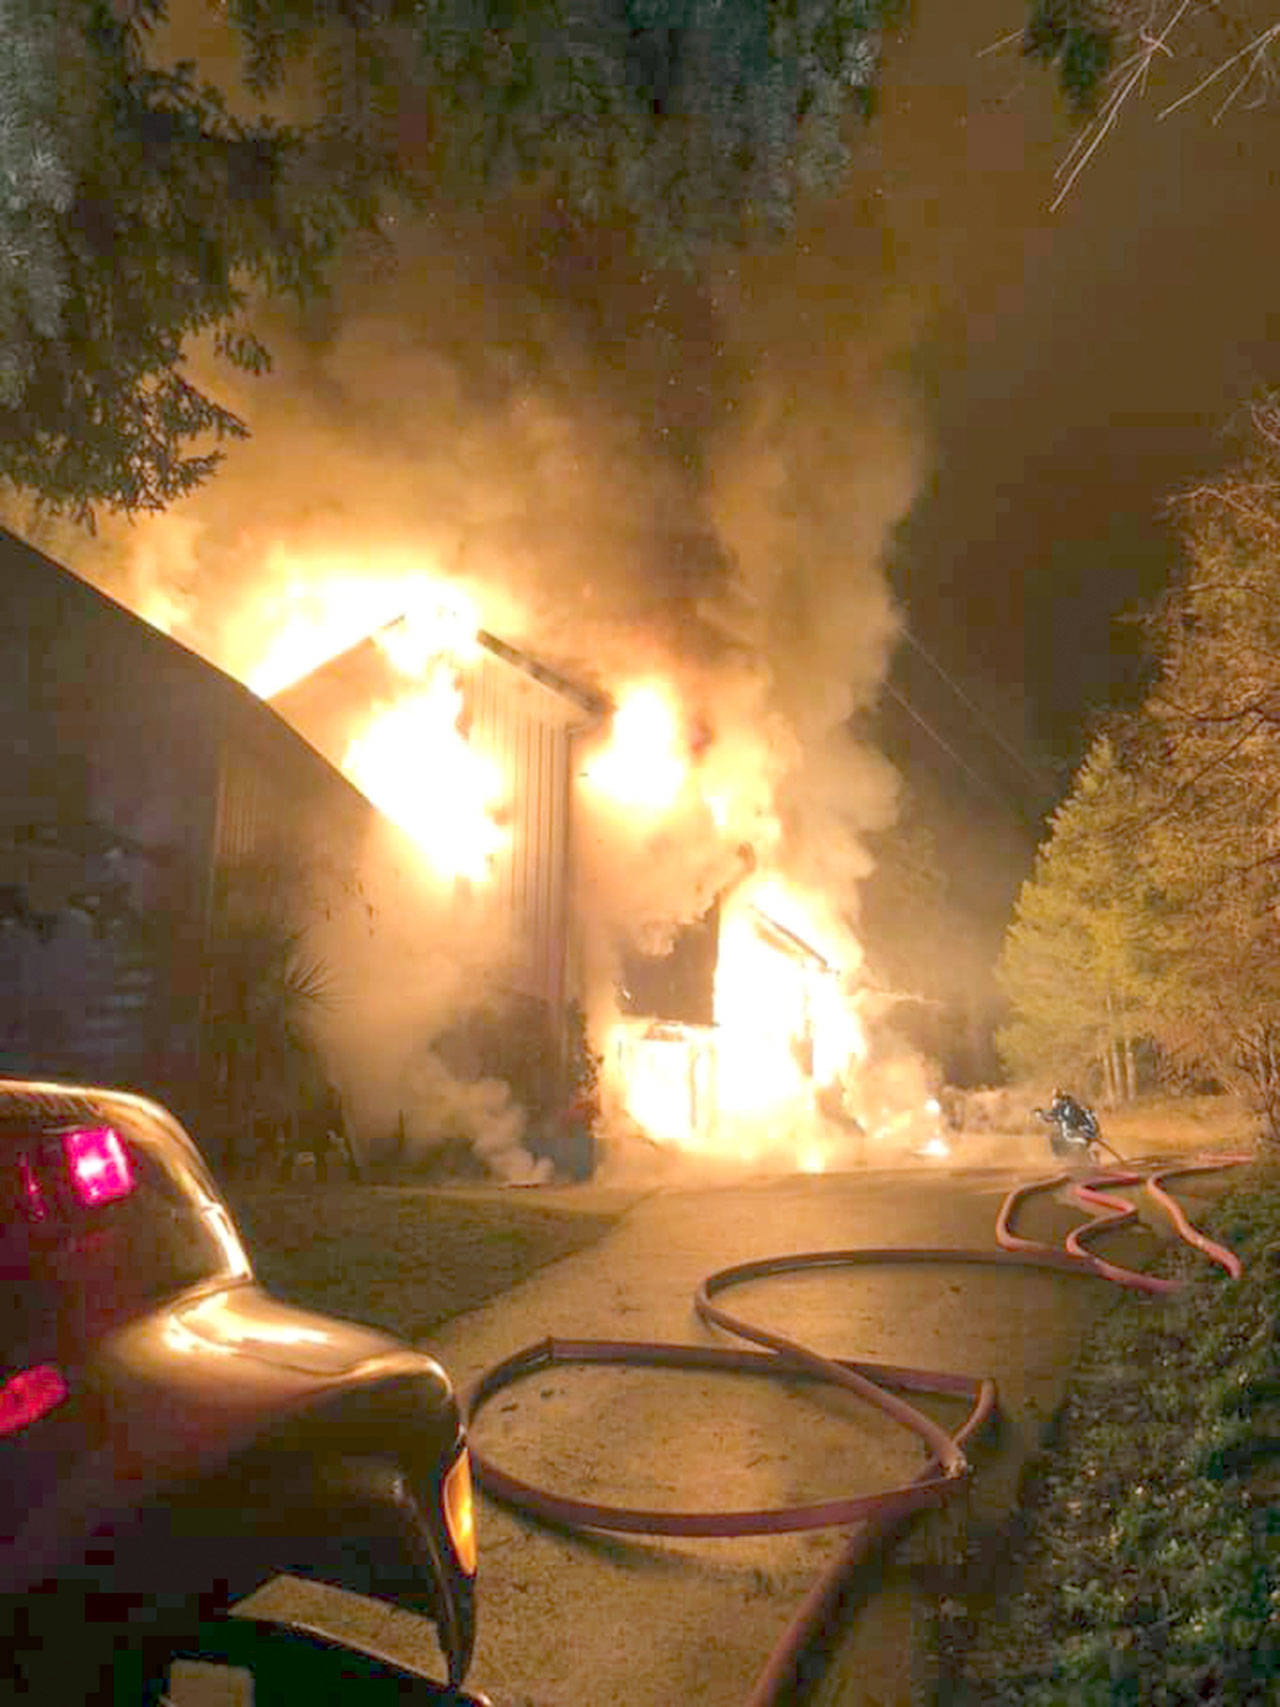 One of the two occupants of a three-story home near Brinnon was found dead inside after a fire early Tuesday, Brinnon Fire Chief Tim Manly said. (Brinnon Fire Department)